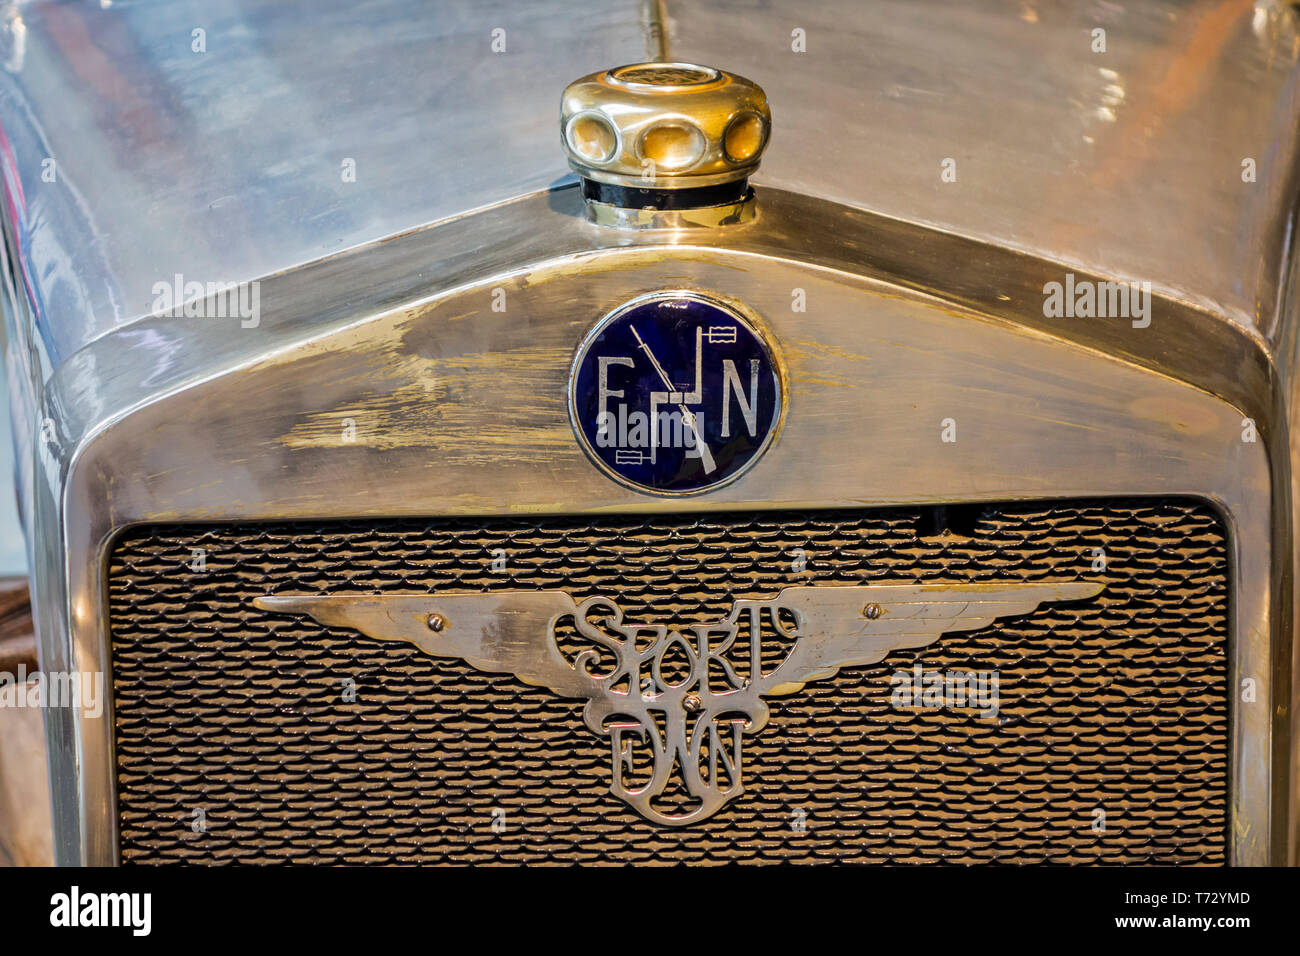 1930 FN 1400 S close-up of radiator grill badge of Belgian classic car / oldtimer at Autoworld, vintage automobile museum in Brussels, Belgium Stock Photo